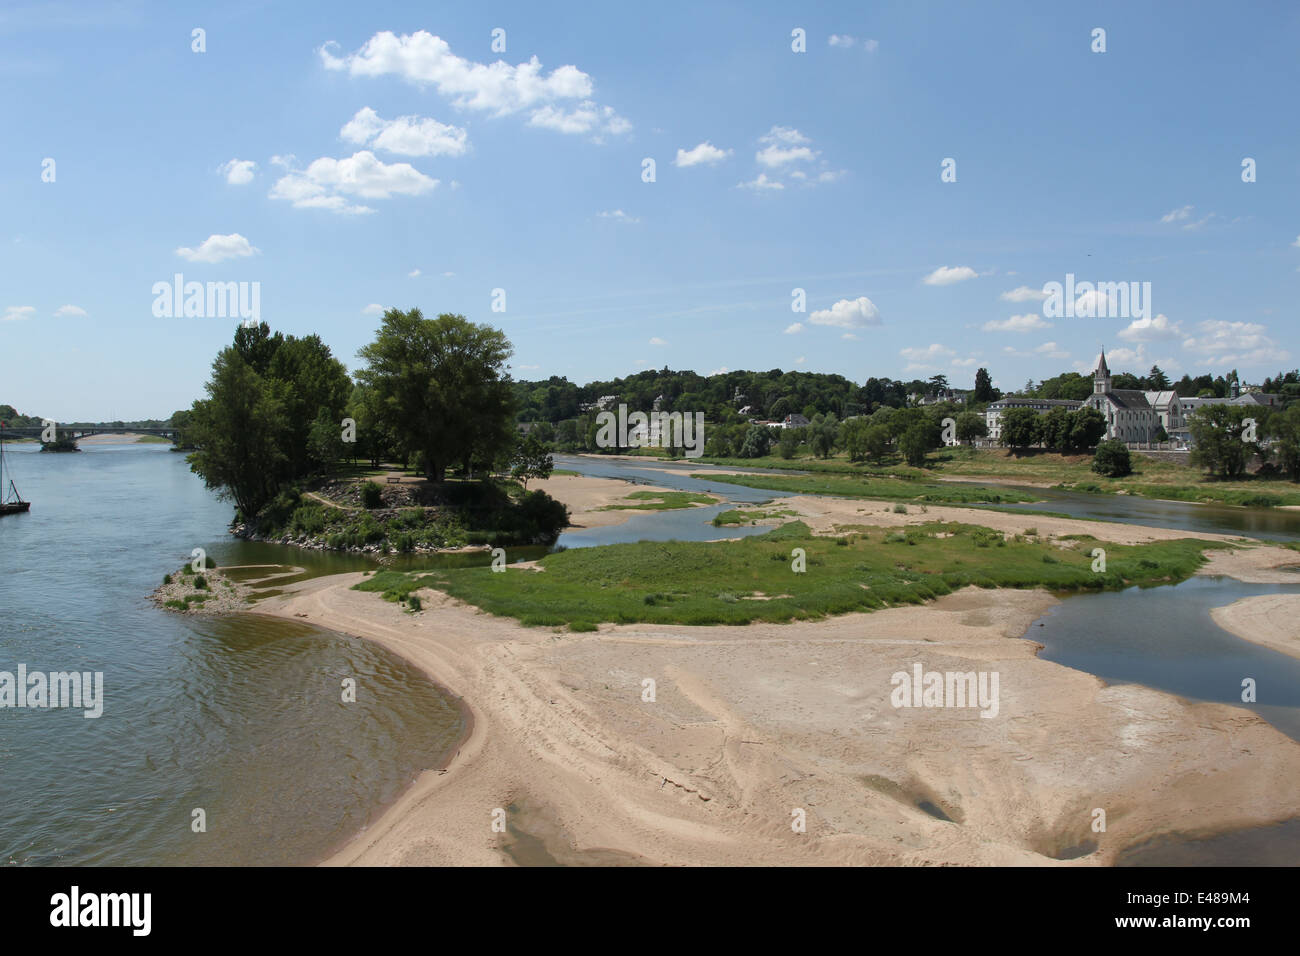 Sand banks in River Loire Tours France  July 2014 Stock Photo